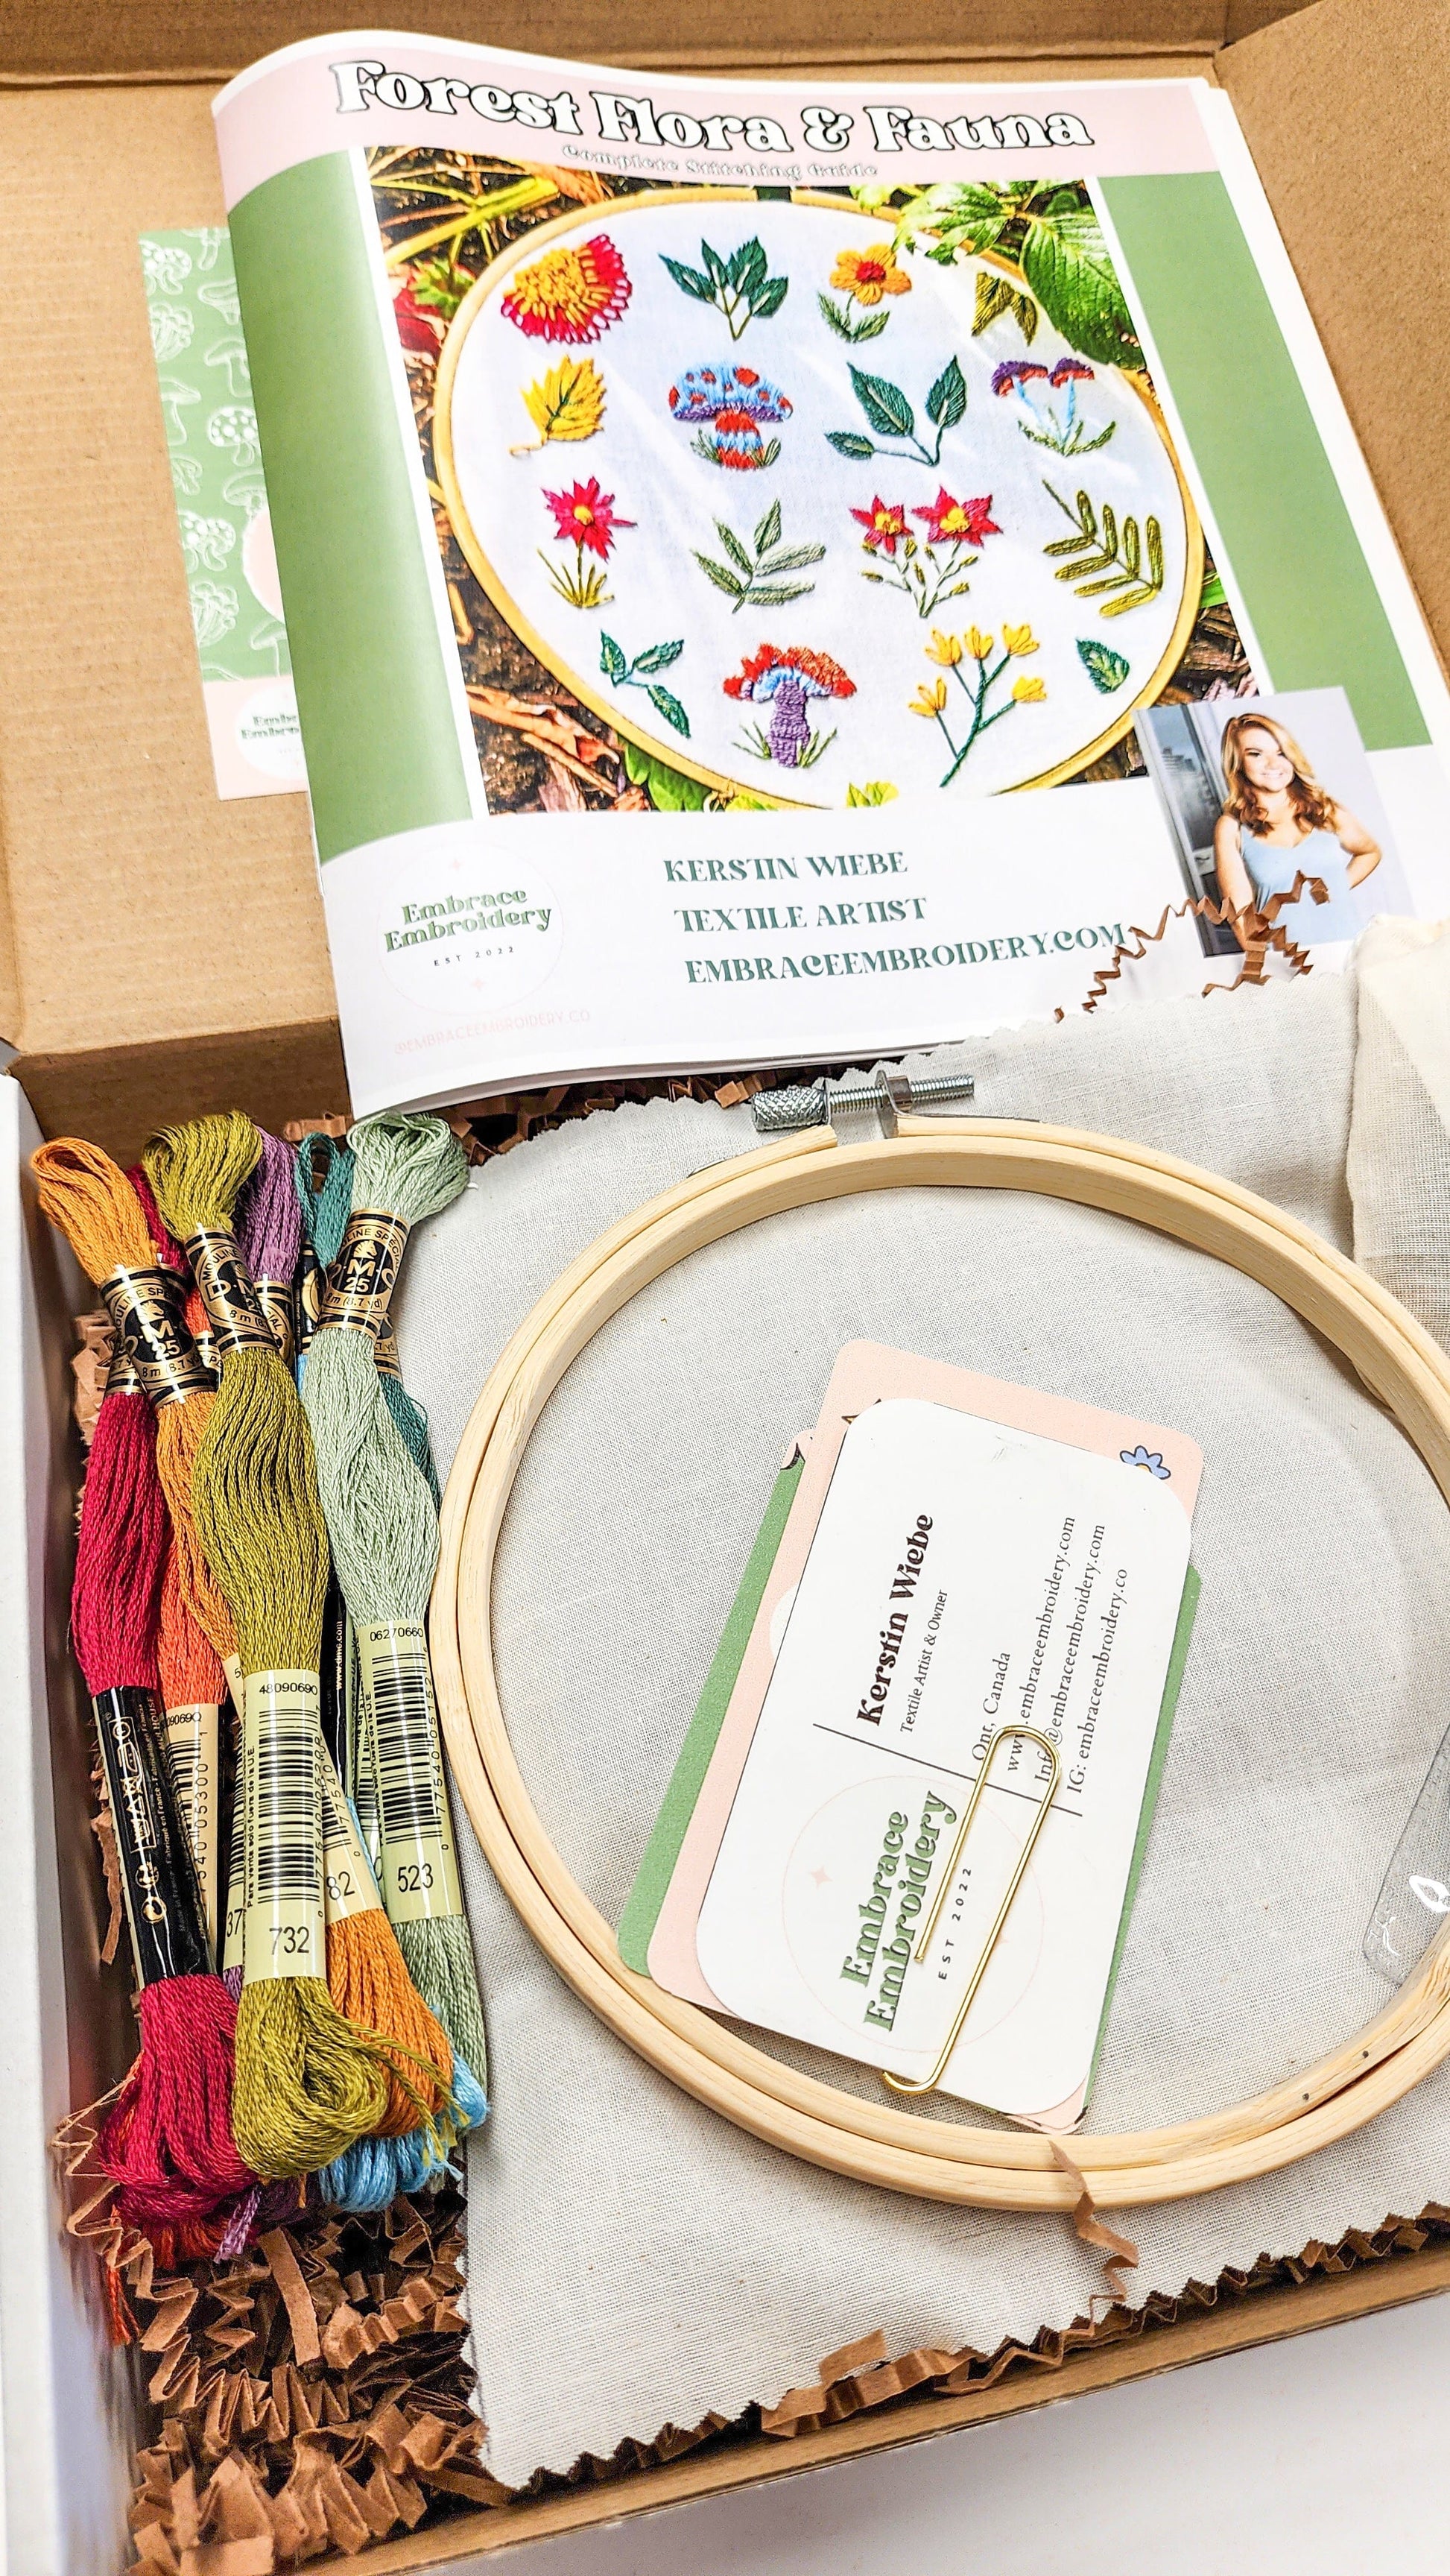 Embrace Embroidery Embroidery Kit Forest Flora & Fauna- Complete DIY Embroidery Kit